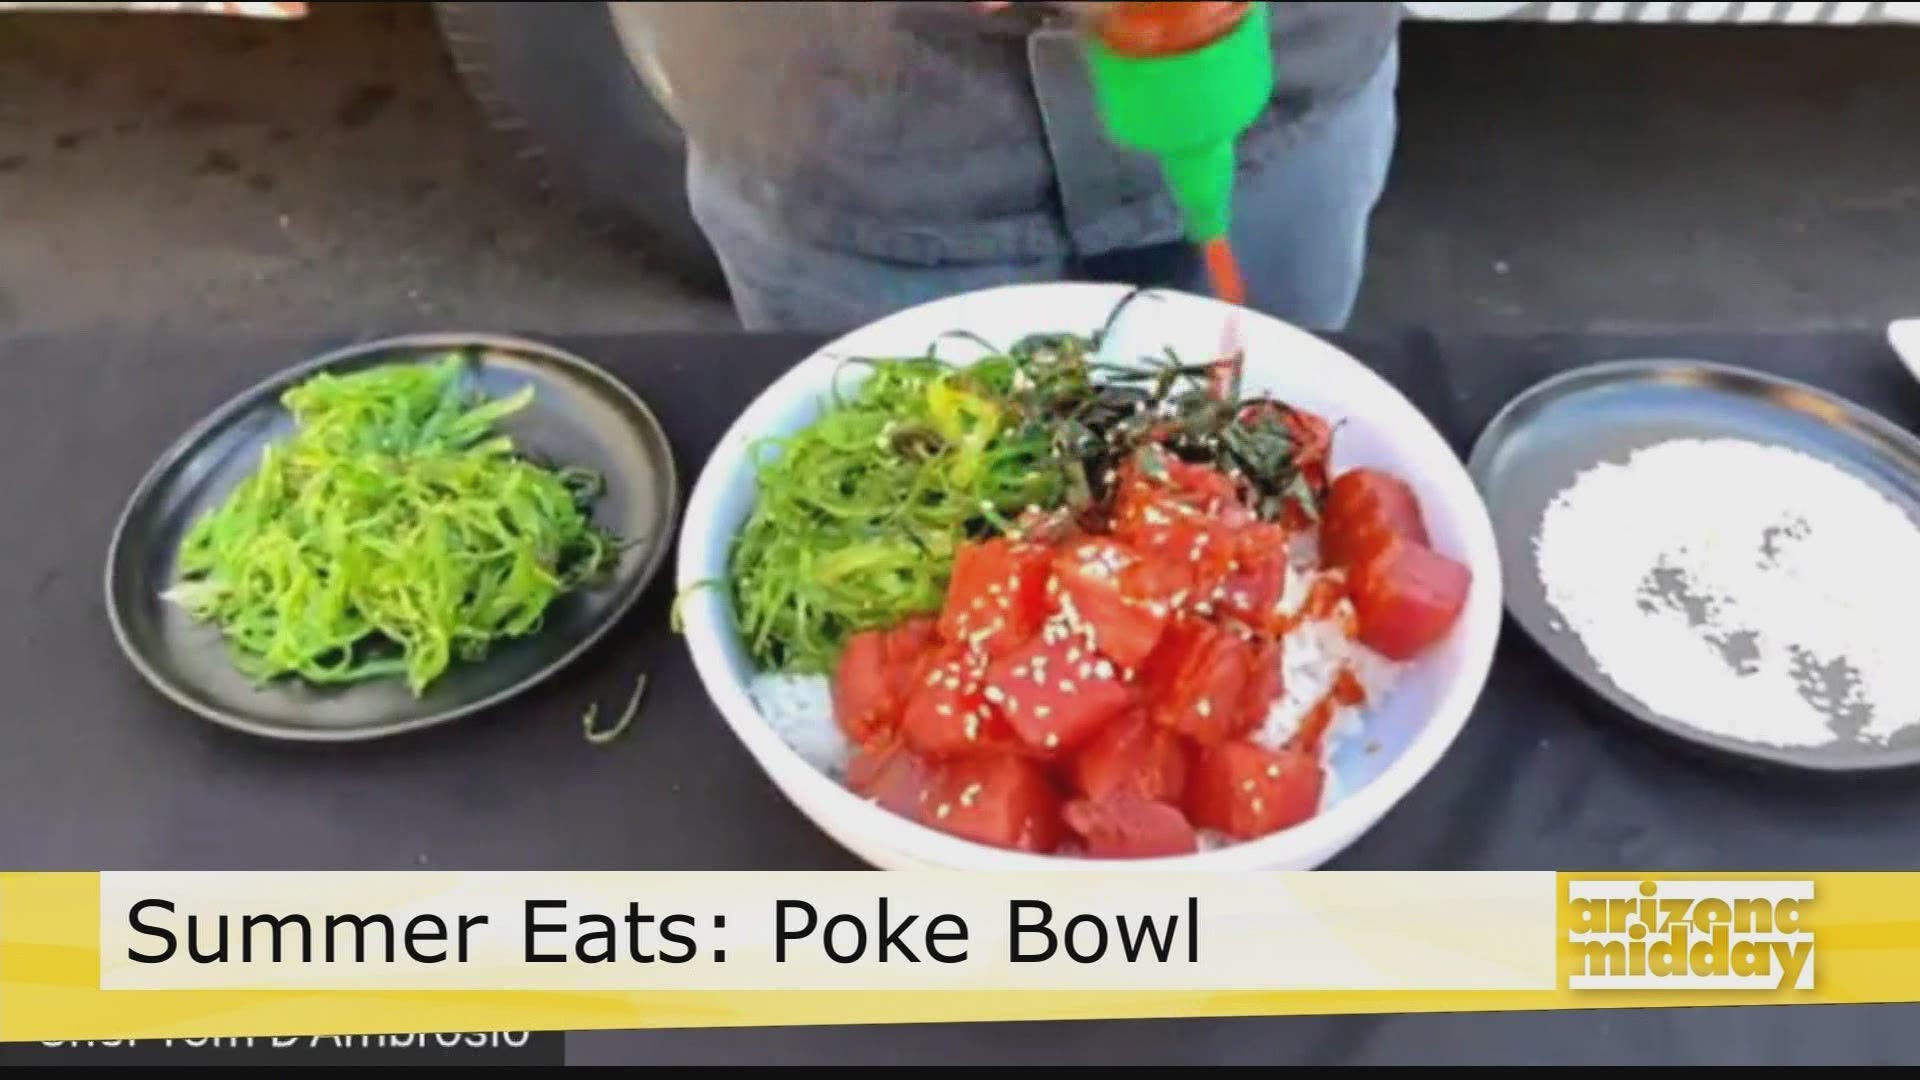 Modern Tortilla's Chef Tom D'Ambrosio shows us how to make a poke bowl and tells us about his three brand food truck concept.